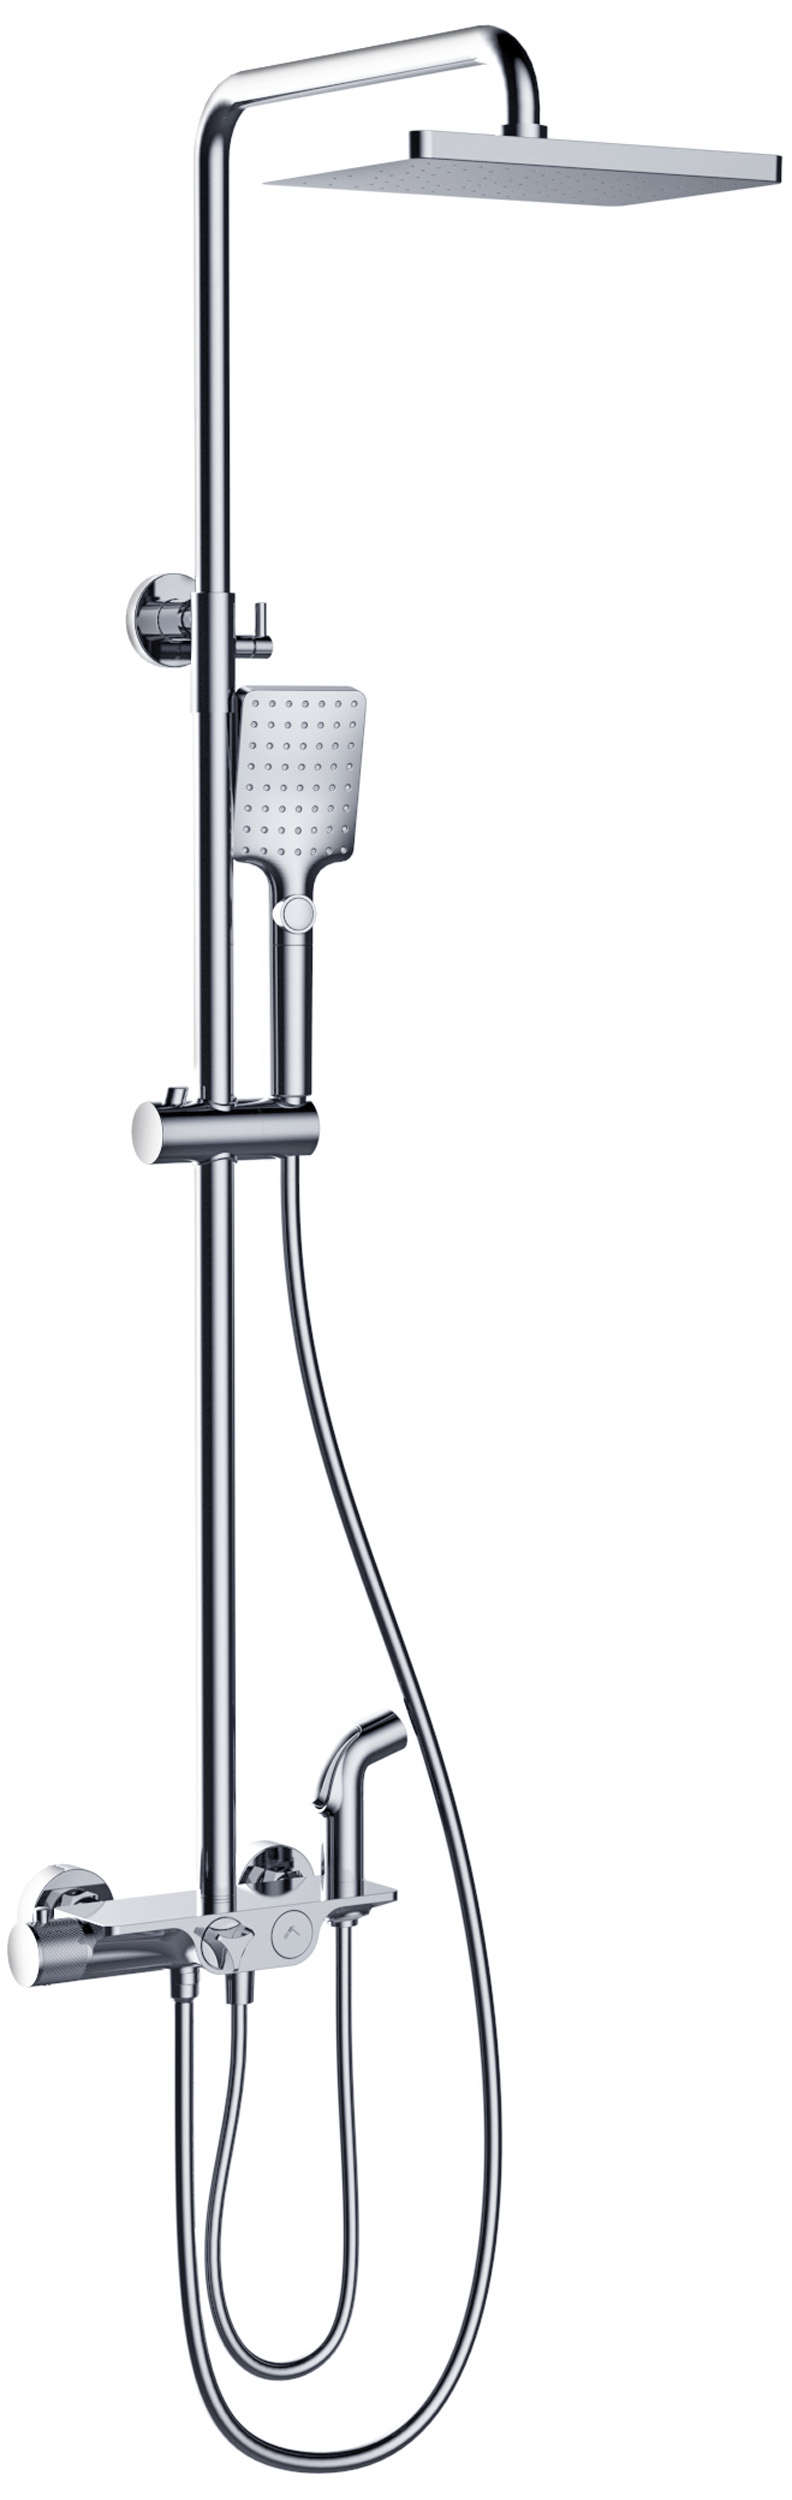 Wall Mounted Brass Thermostatic Shower mixer